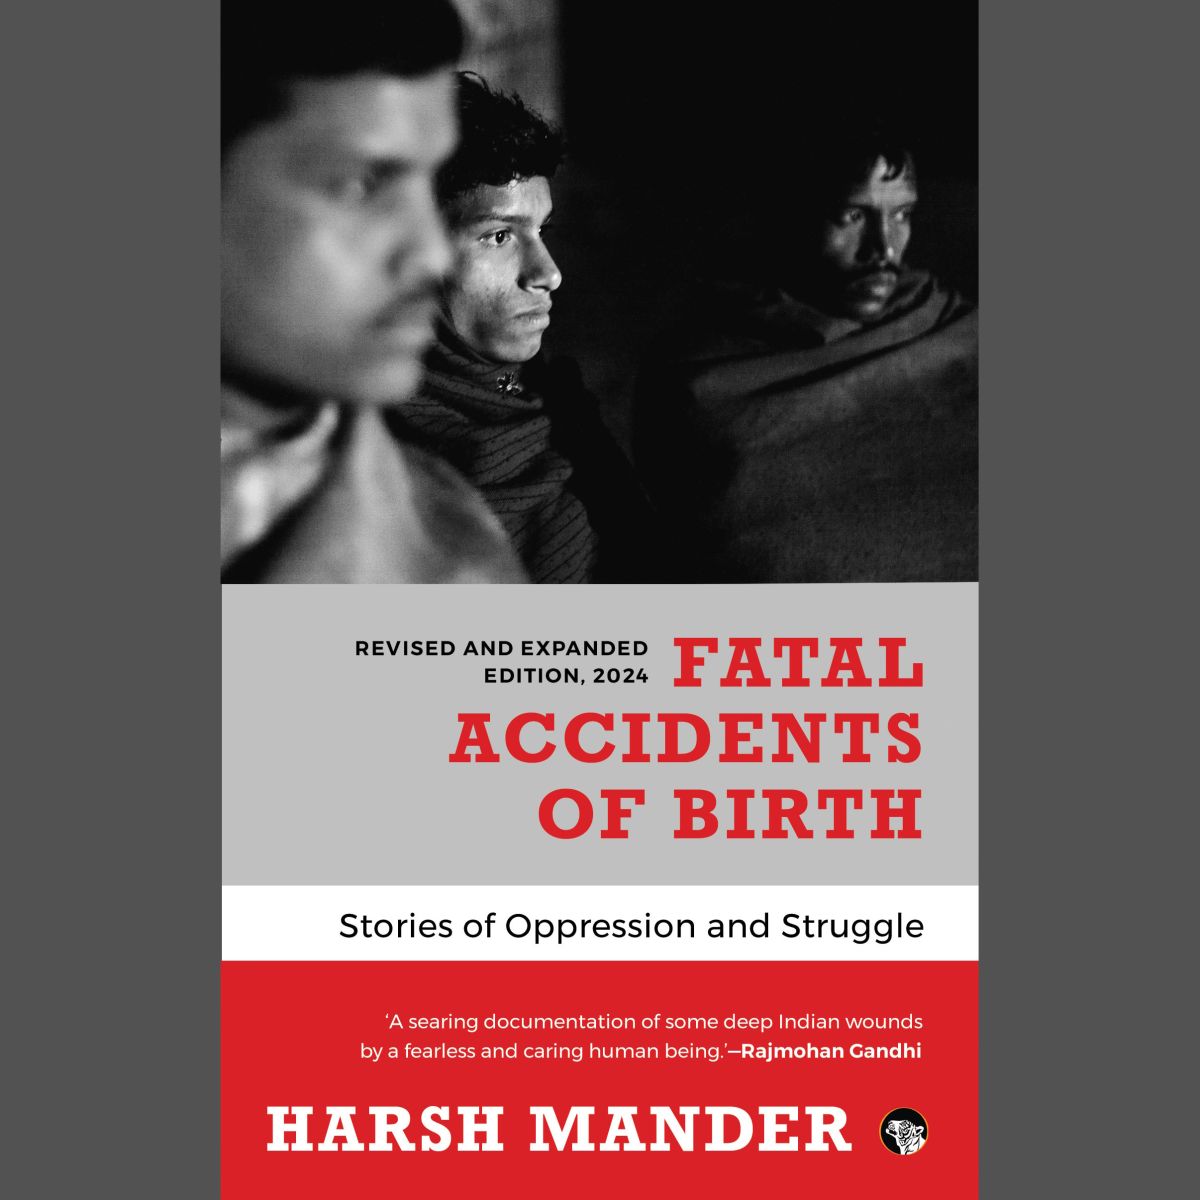 Fatal Accidents of Birth: An Excerpt